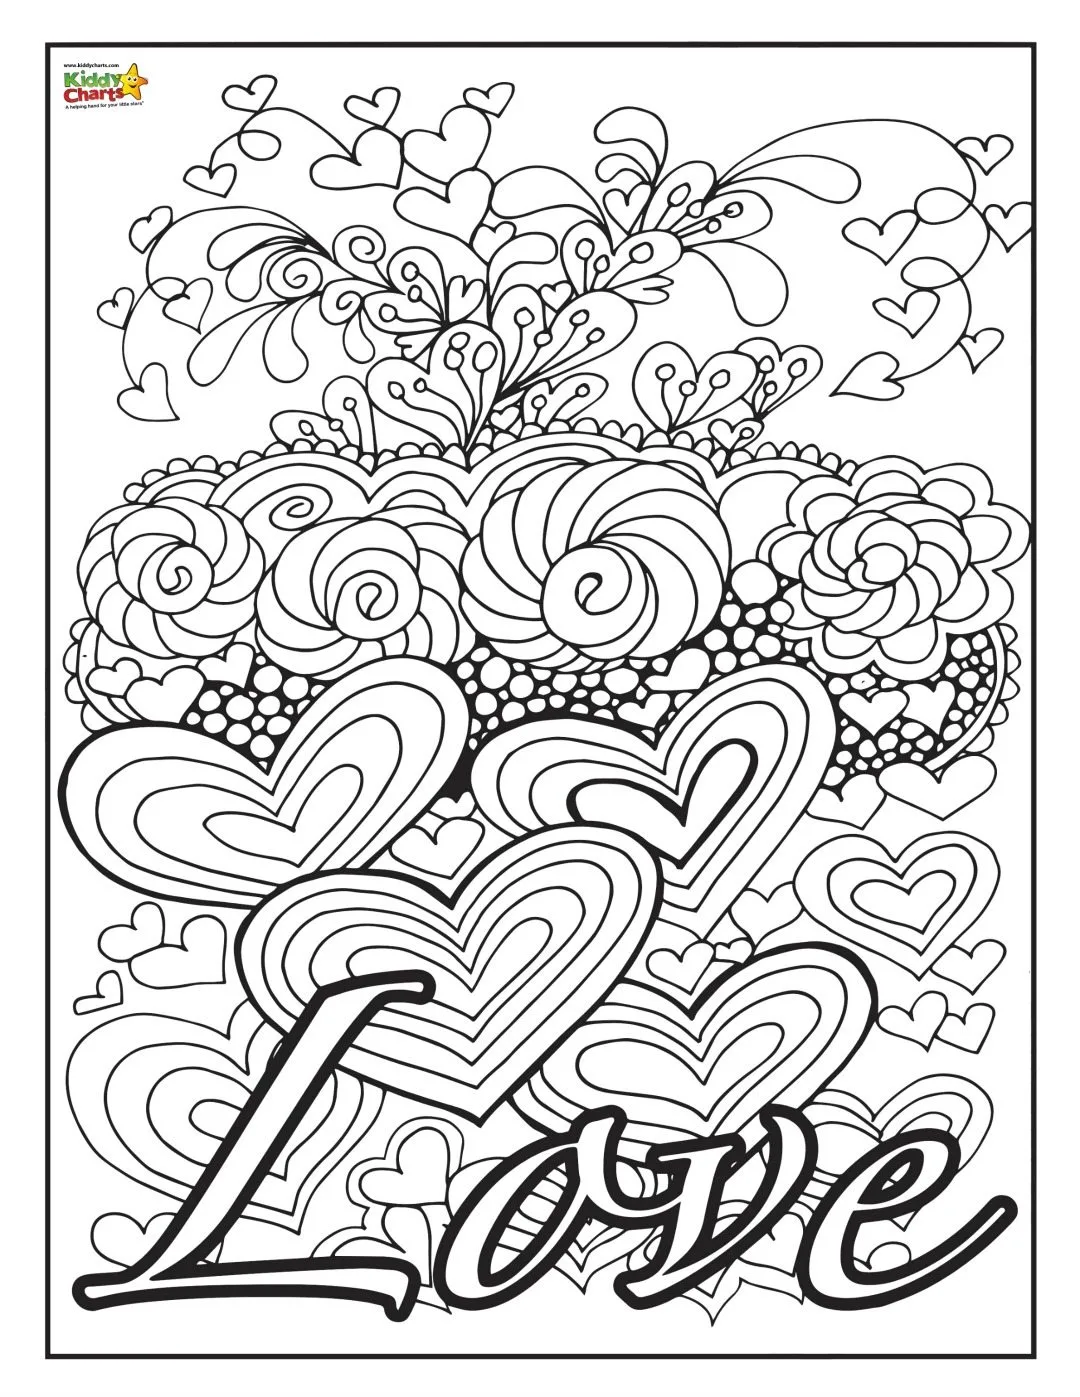 Love kids coloring page